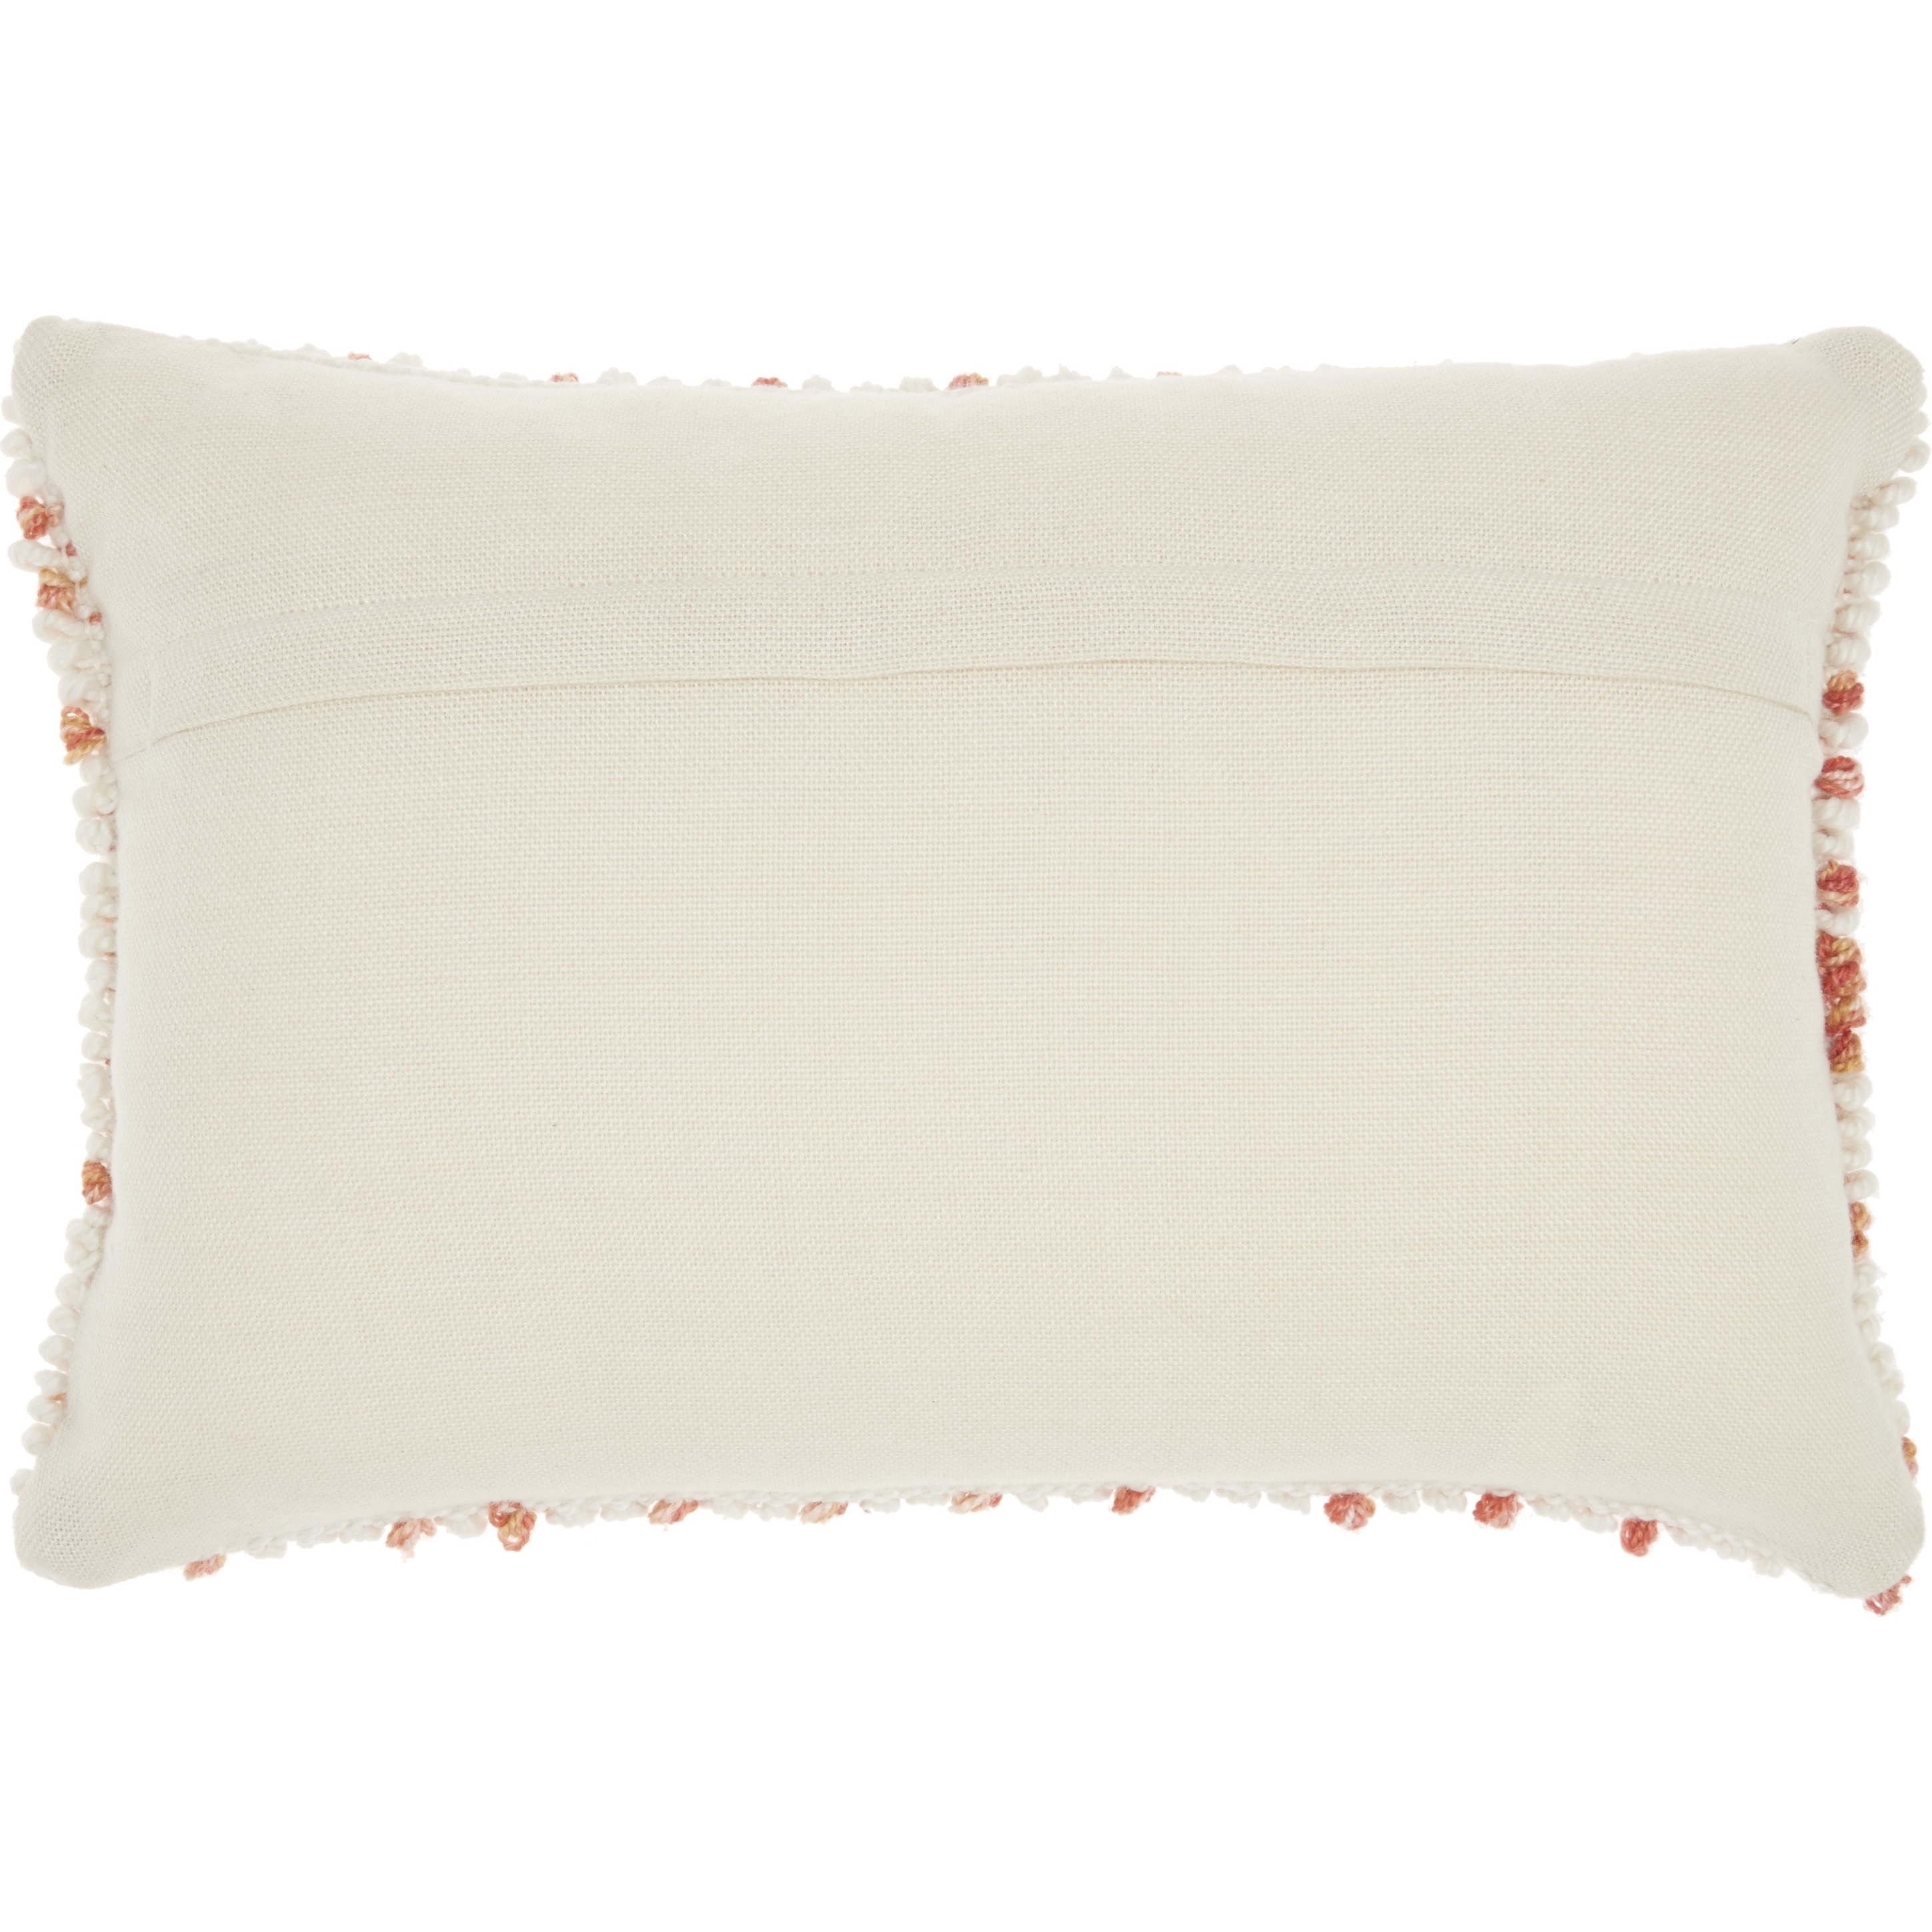 Havenside Home Cartier Outdoor Pillows Loop Dots Throw Pillow by  Orange 14" x 20" - image 5 of 5